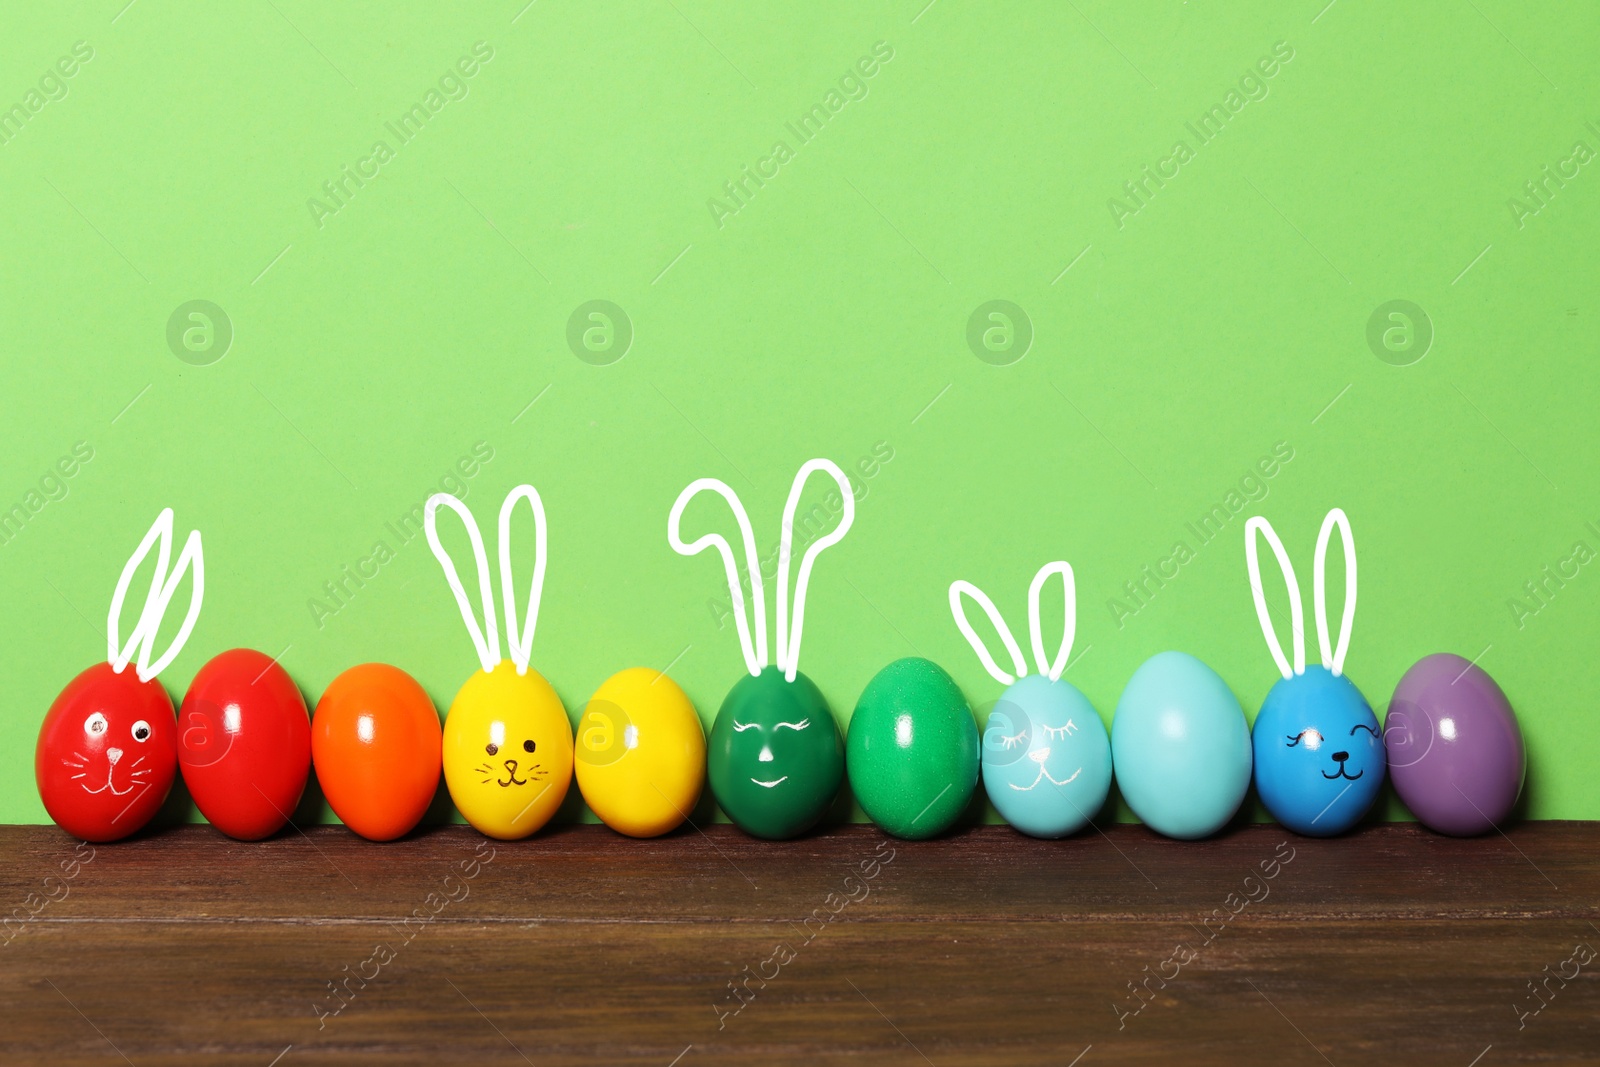 Image of Several eggs with drawn faces and ears as Easter bunnies among others  on wooden table against green background